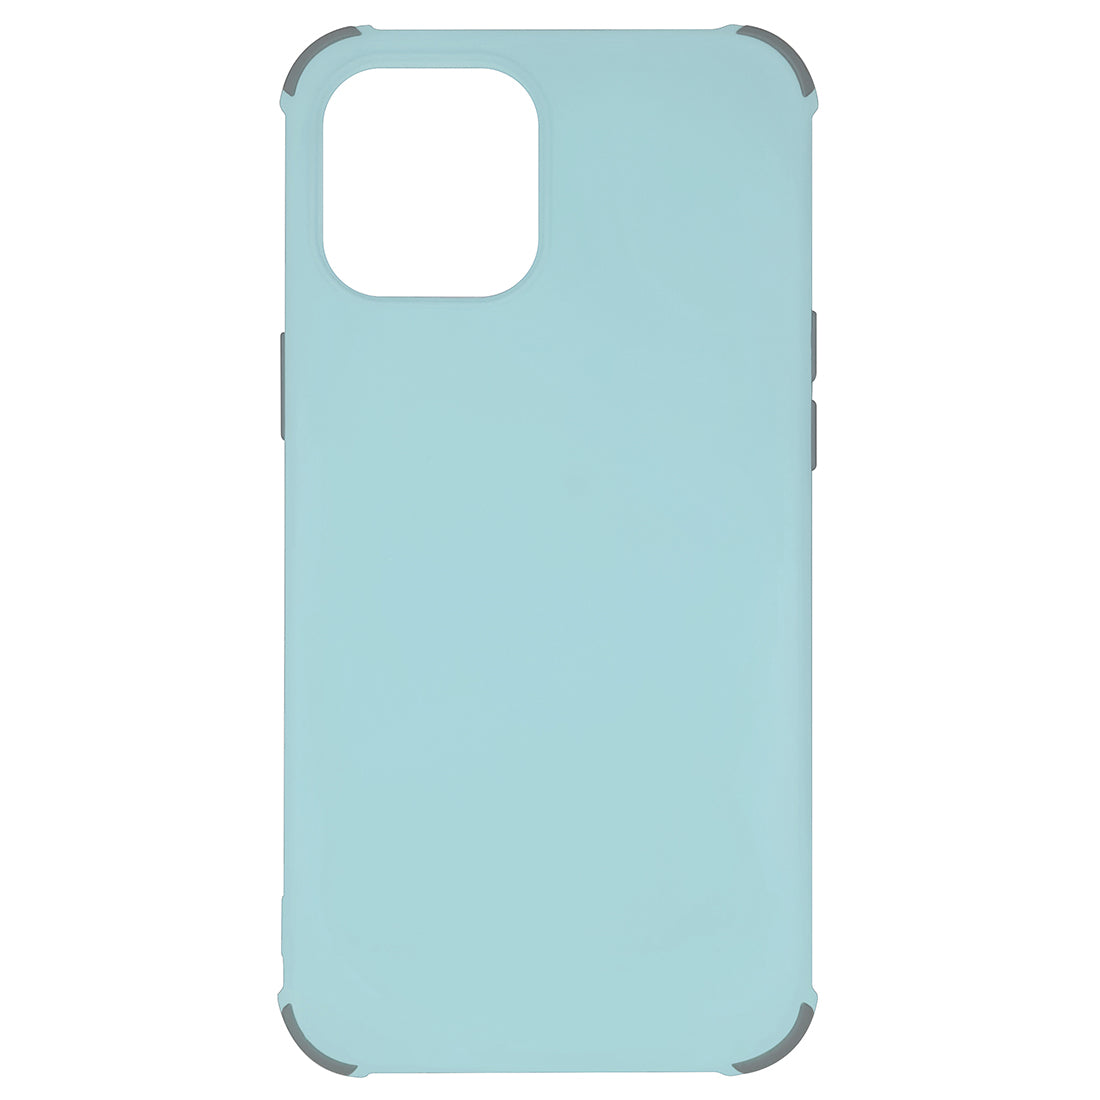 Matte Finish TPU Back Cover for Apple iPhone 12 / 12 Pro